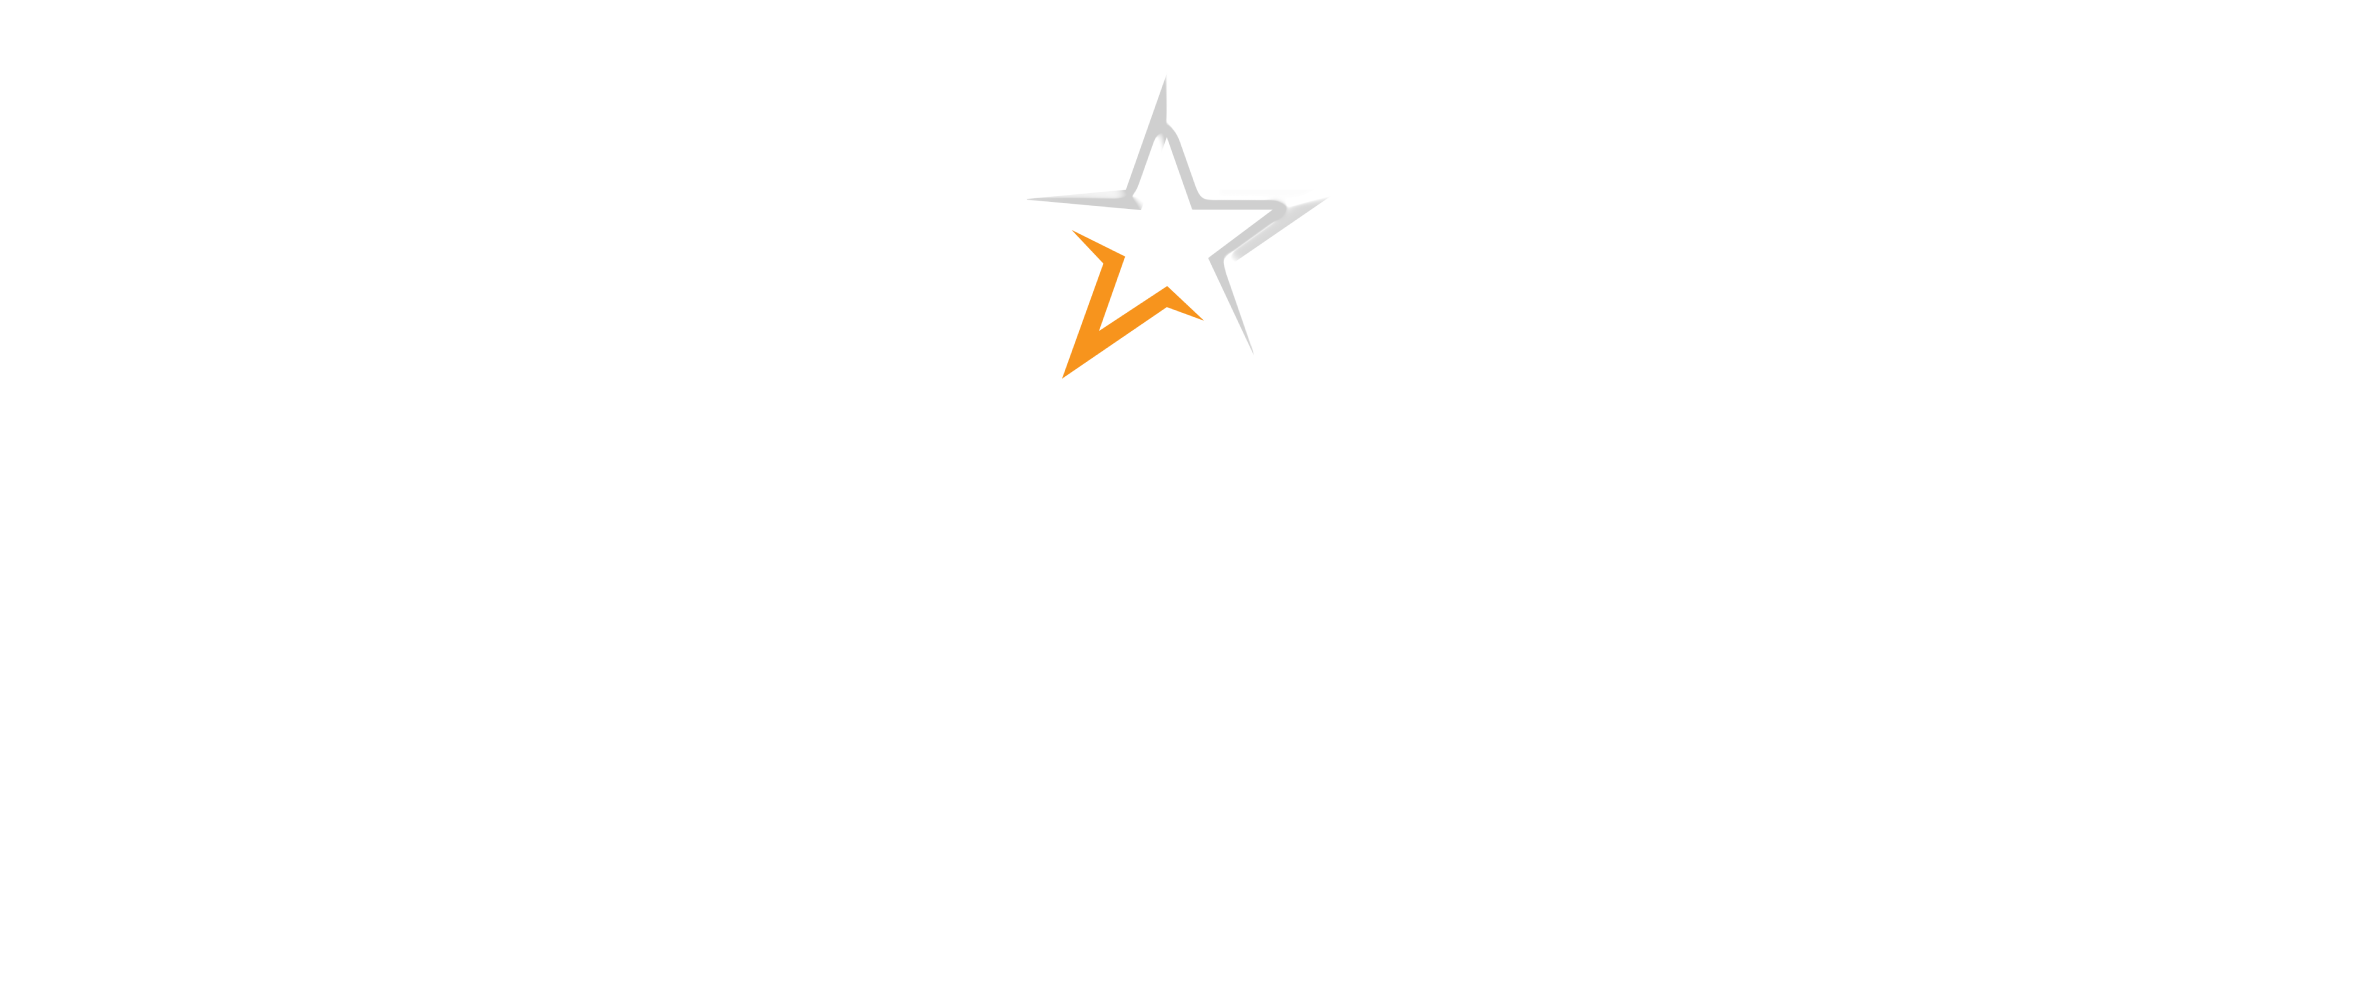 YourSigning